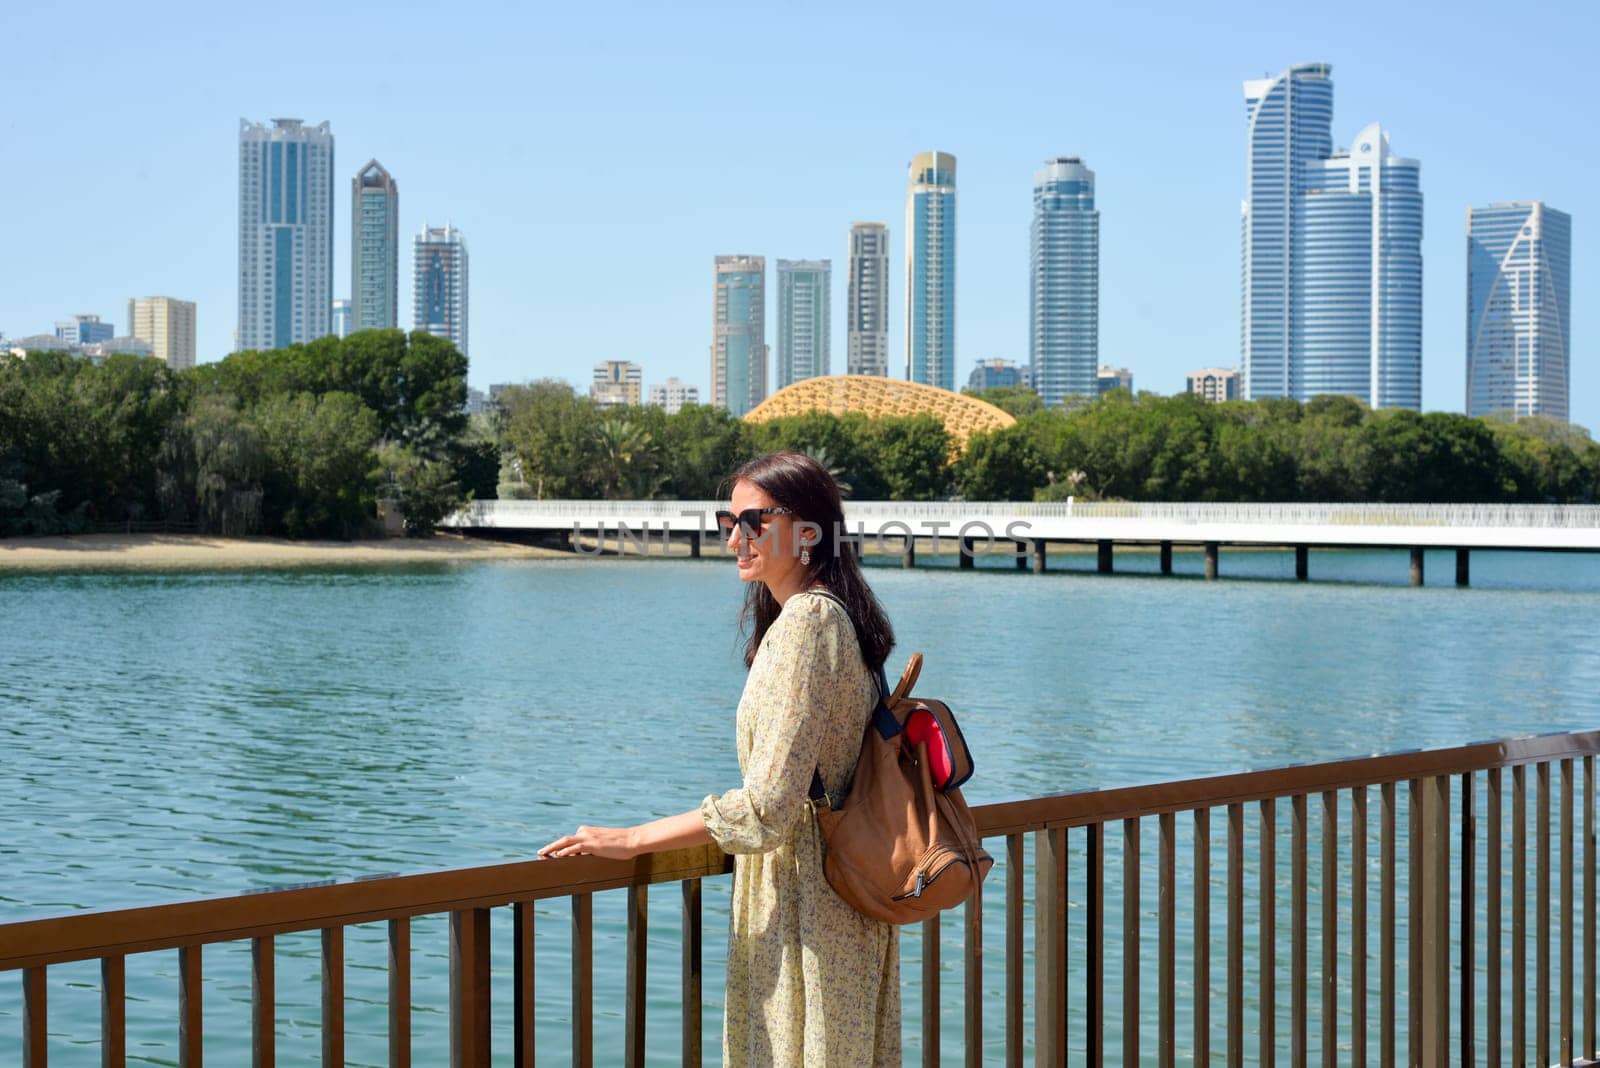 The skyline of Sharjah is visible from the waterfront - a woman tourist with a backpack enjoys the view of the water and skyscrapers. Cityscape of Sharjah UAE